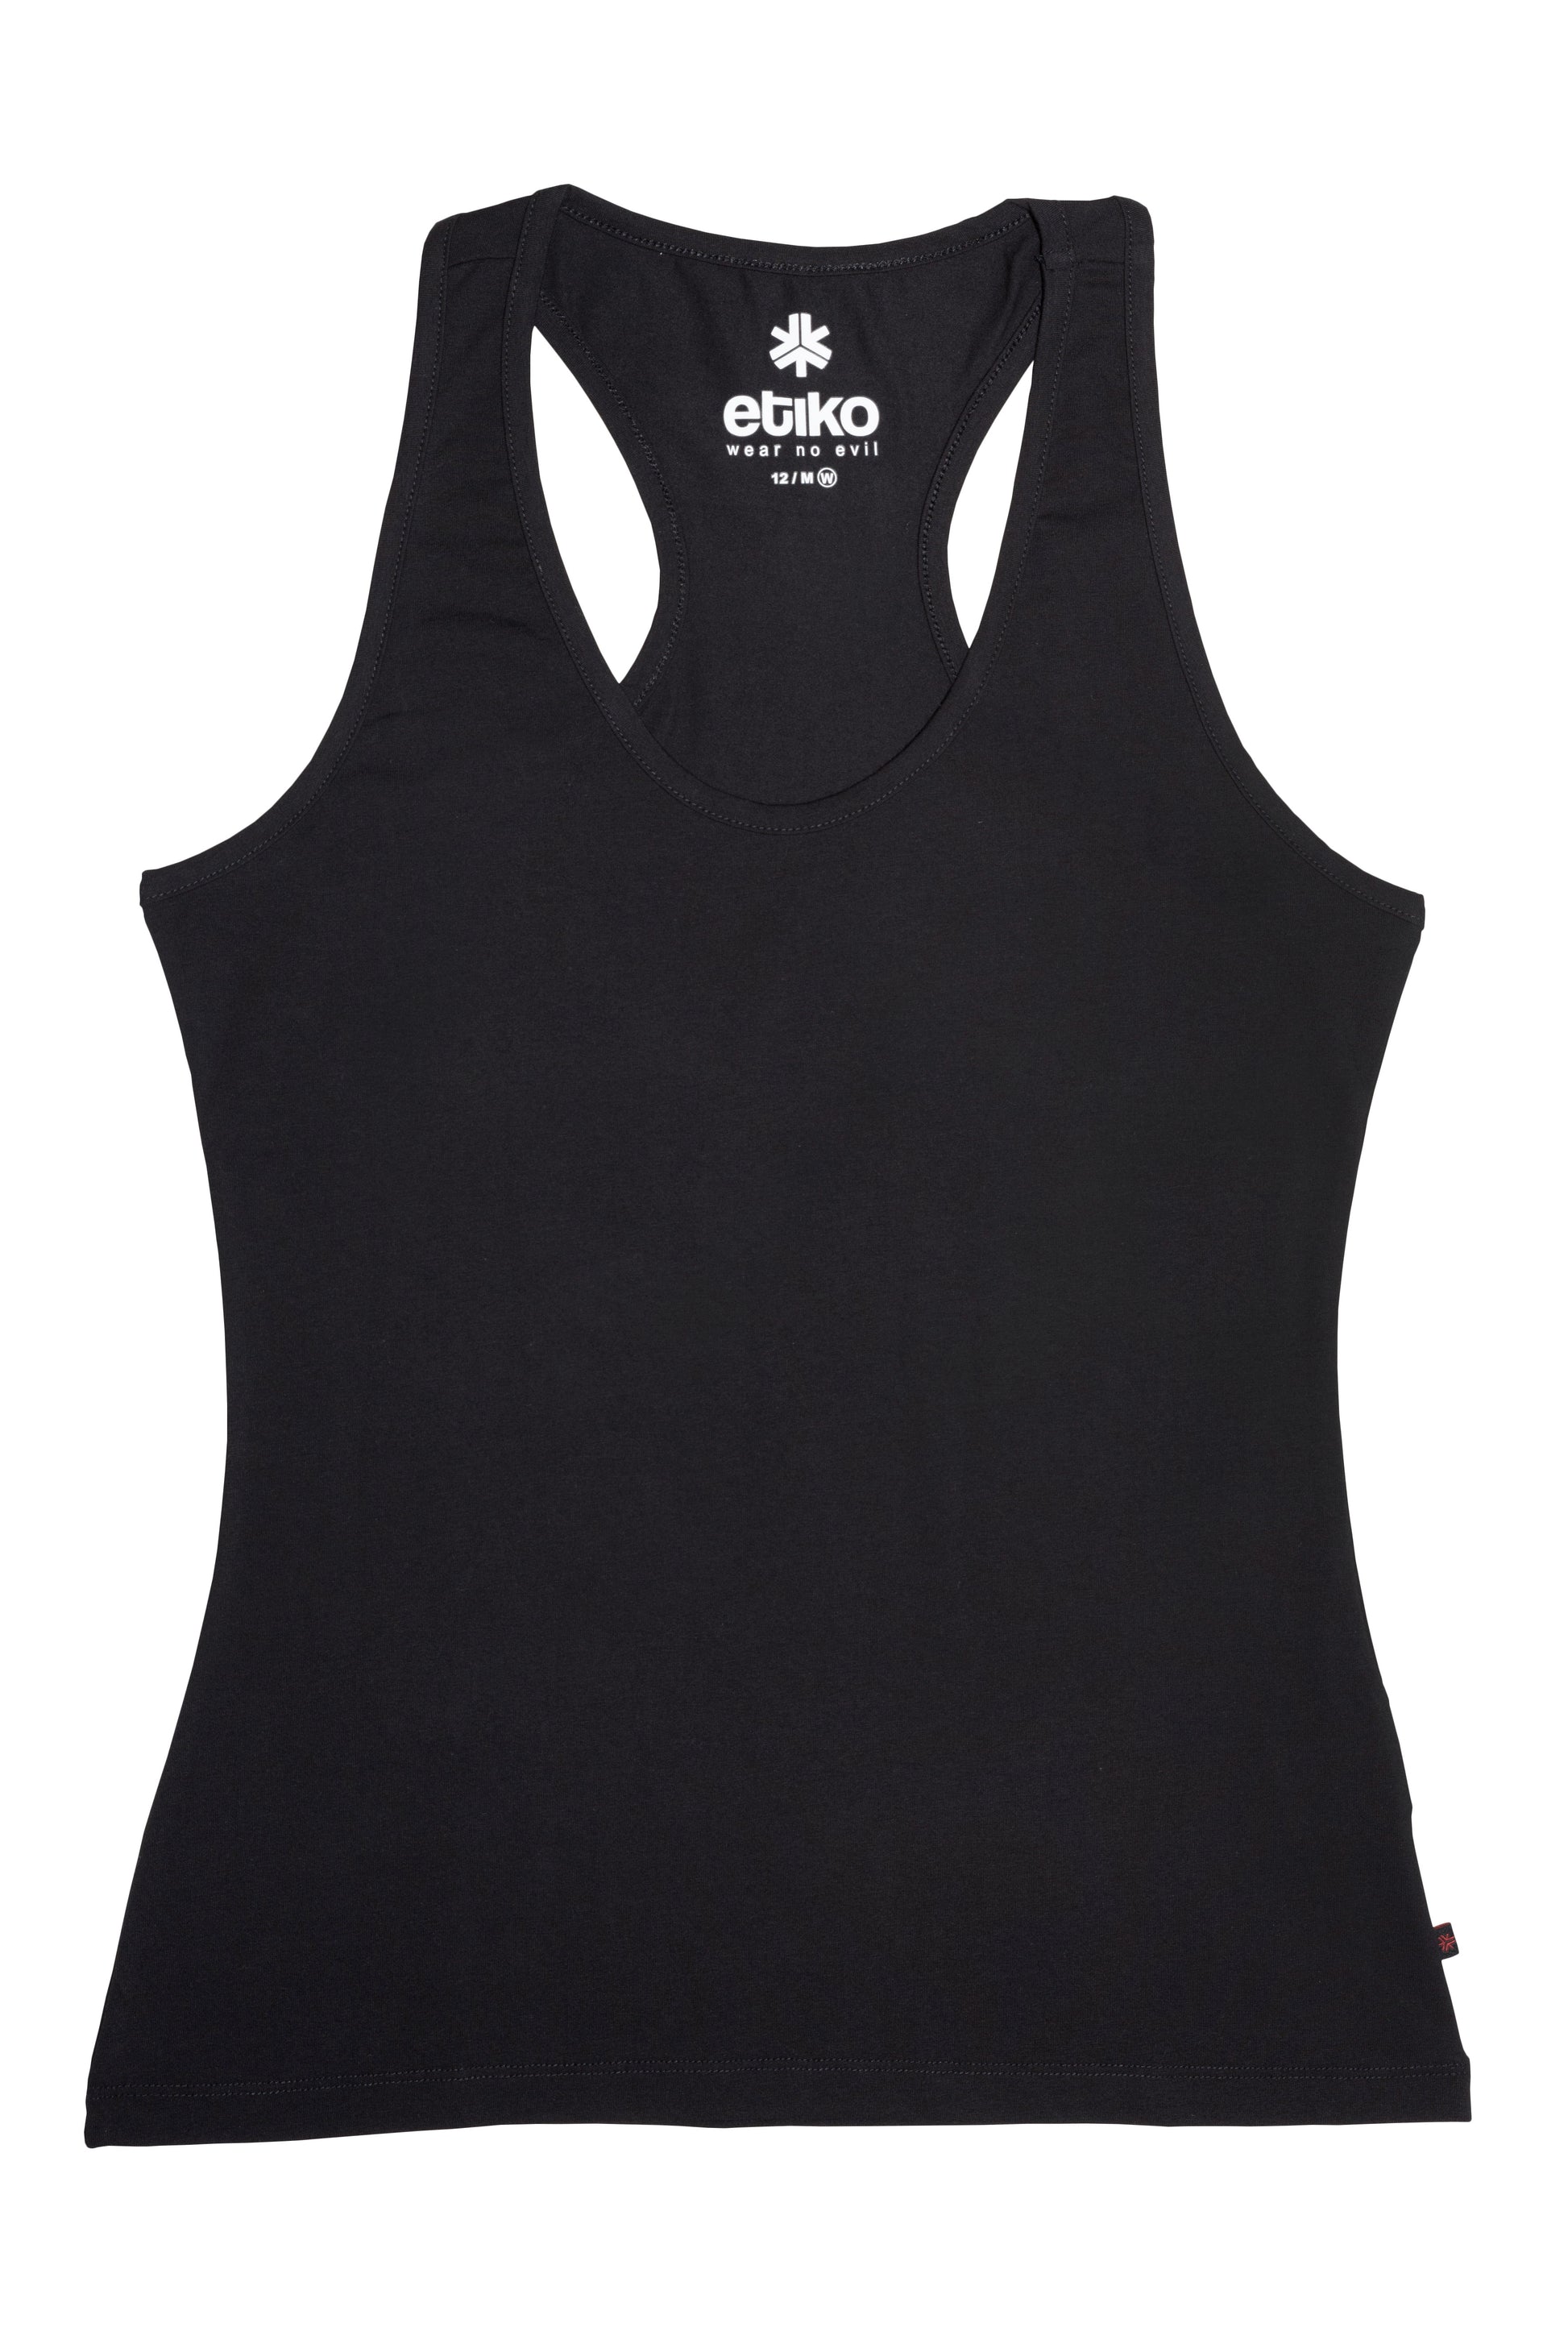 This Racerback Tank Top Is Just $10 at  Right Now